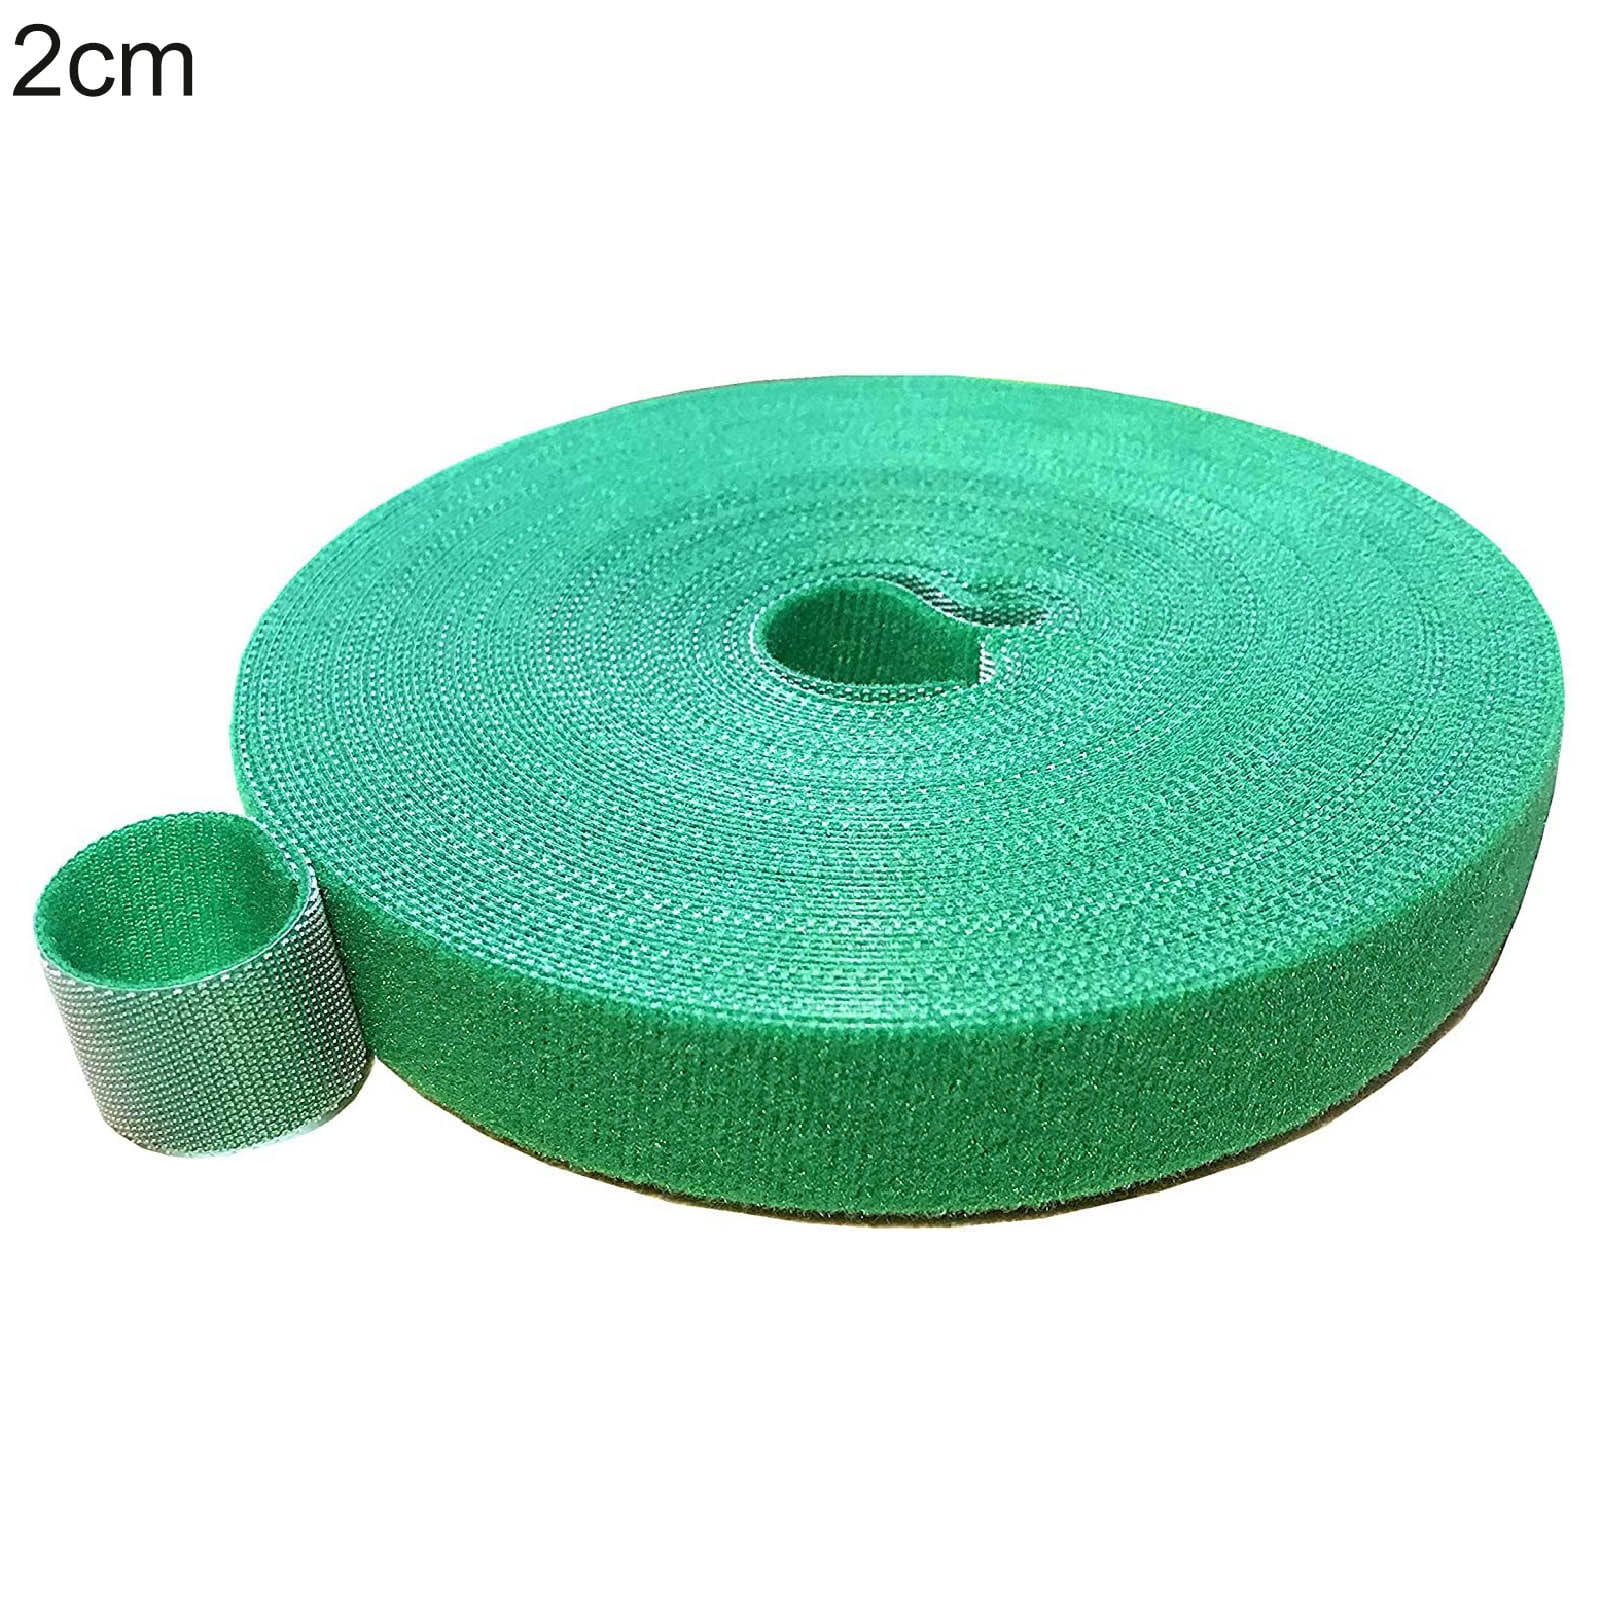 Reusable Plant Tape (1 Roll) - Easy-to-Use Multi-Color Cuttable Multifunctional Strap for Garden, Size: 1 Medium, Green